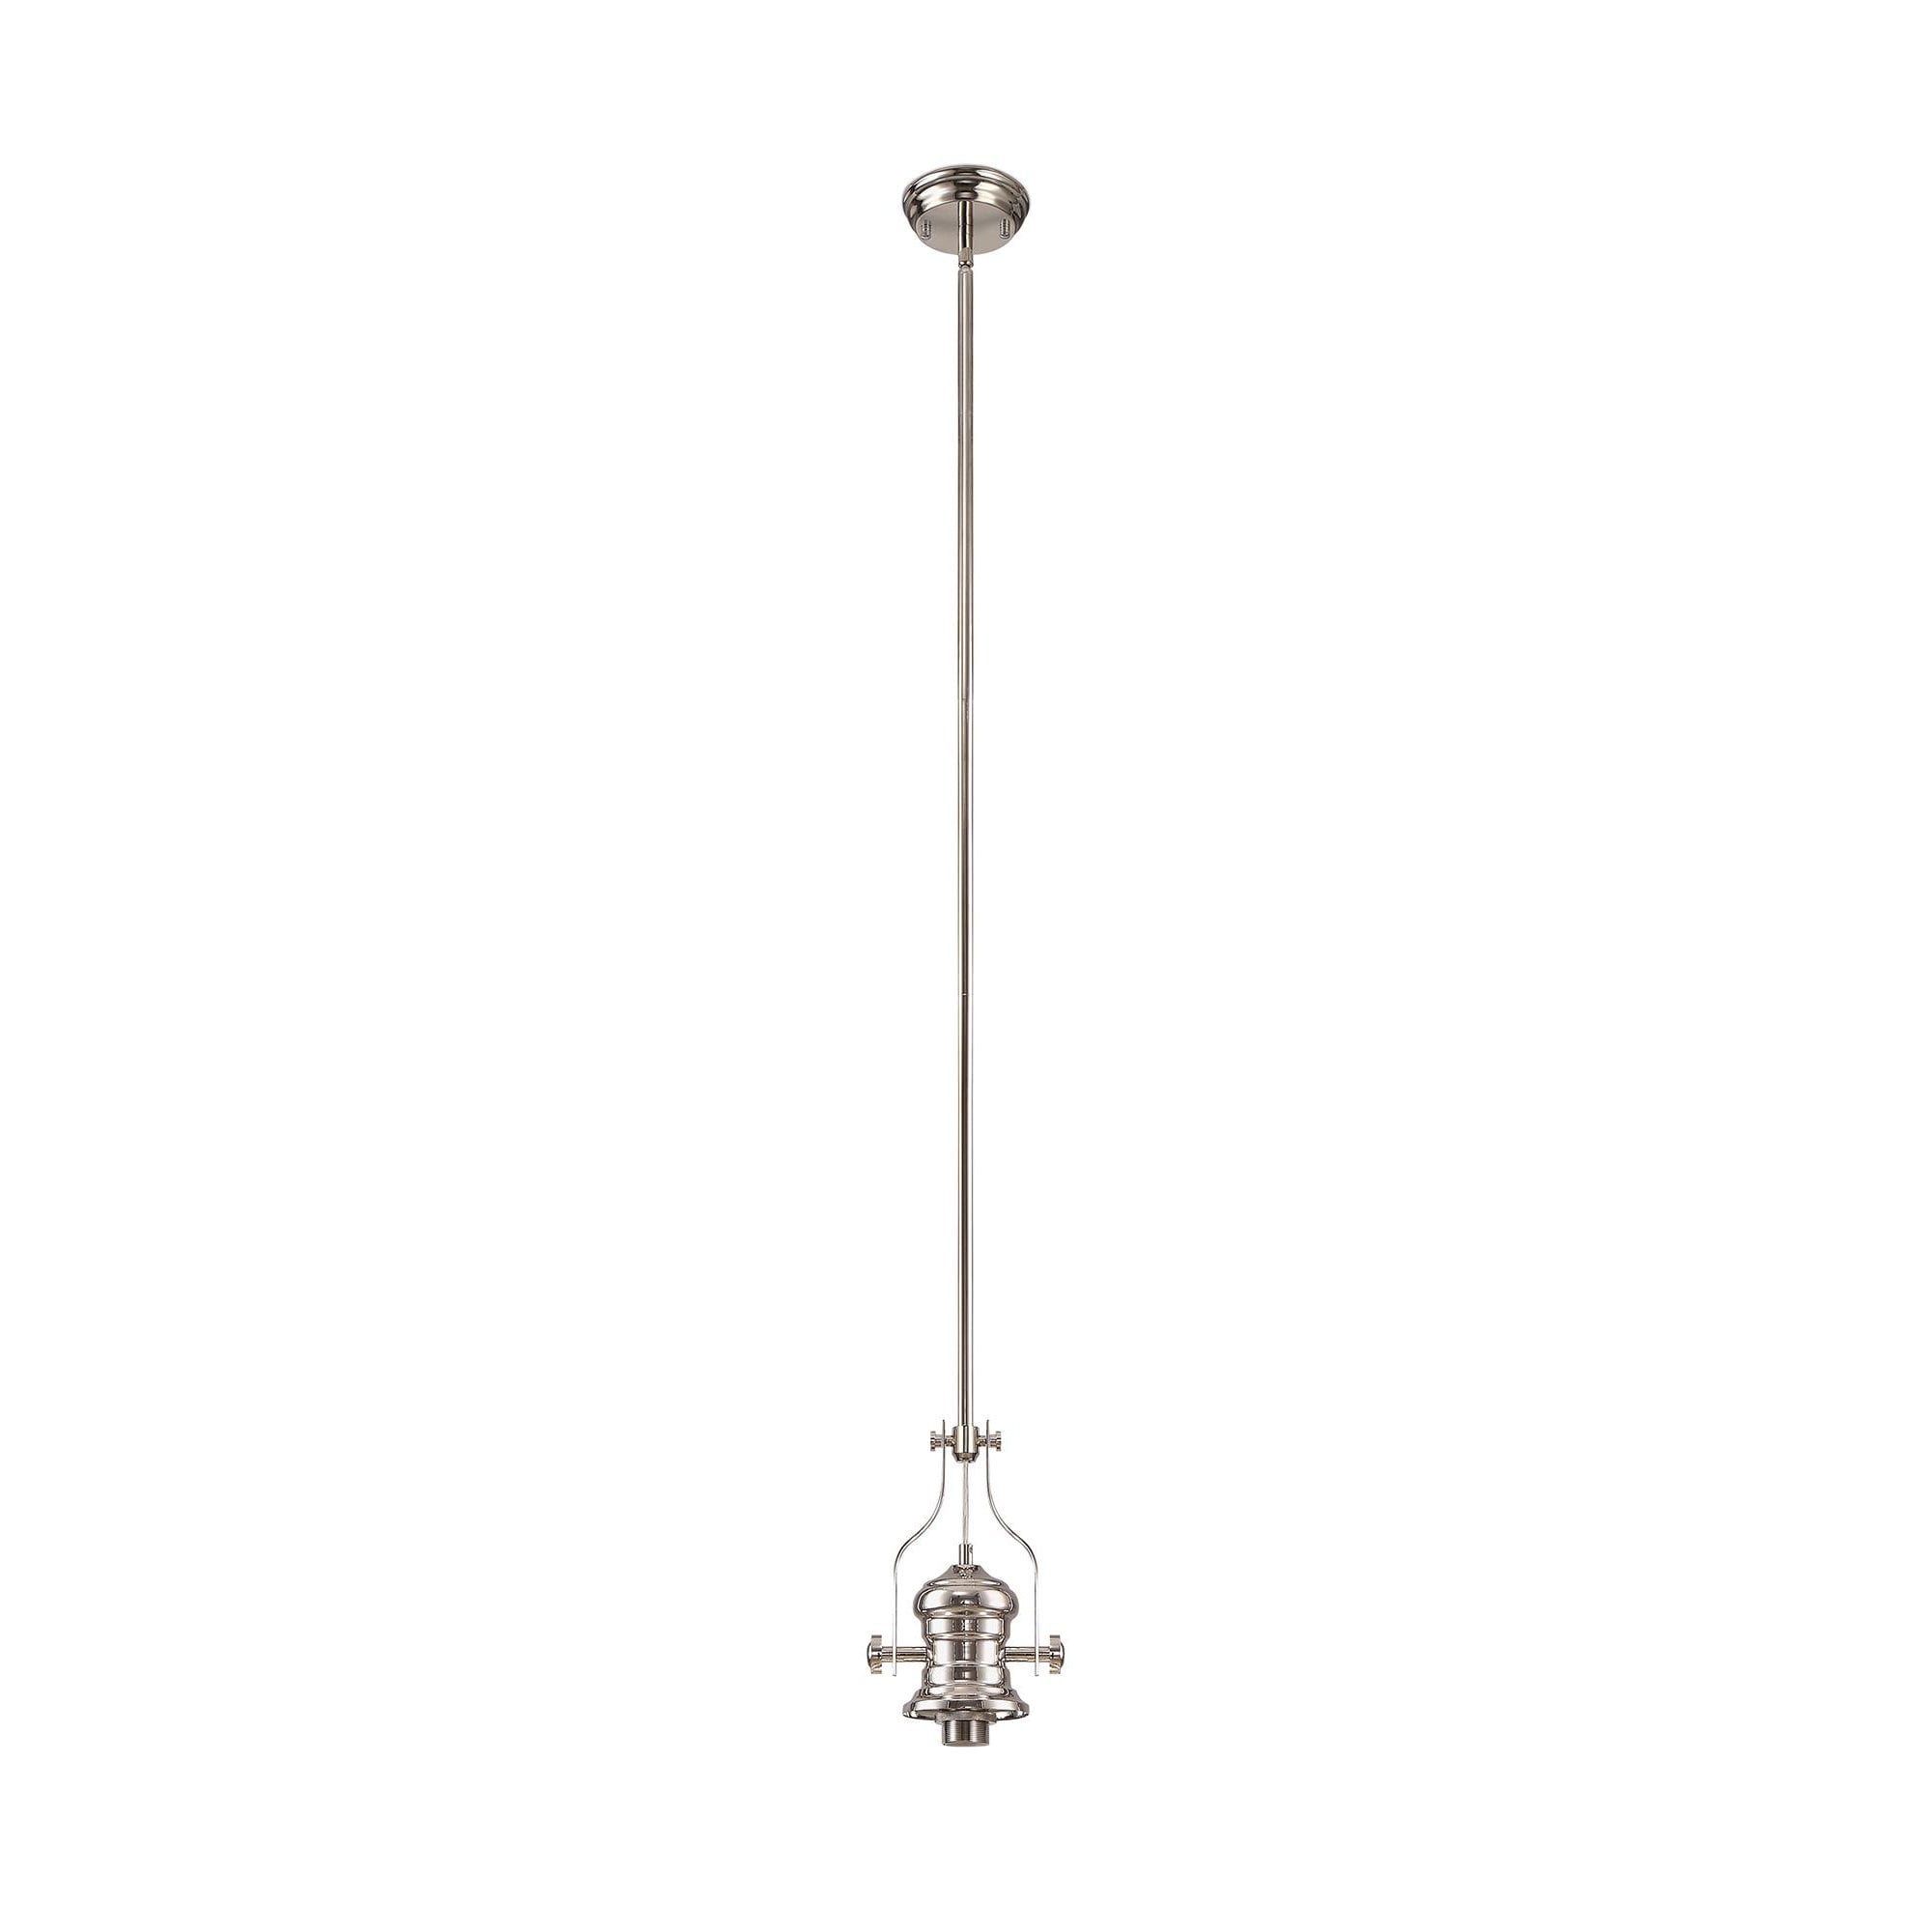 Pendant With 30cm Flat Round Patterned Shade, 1 x E27, Polished Nickel/Clear Glass